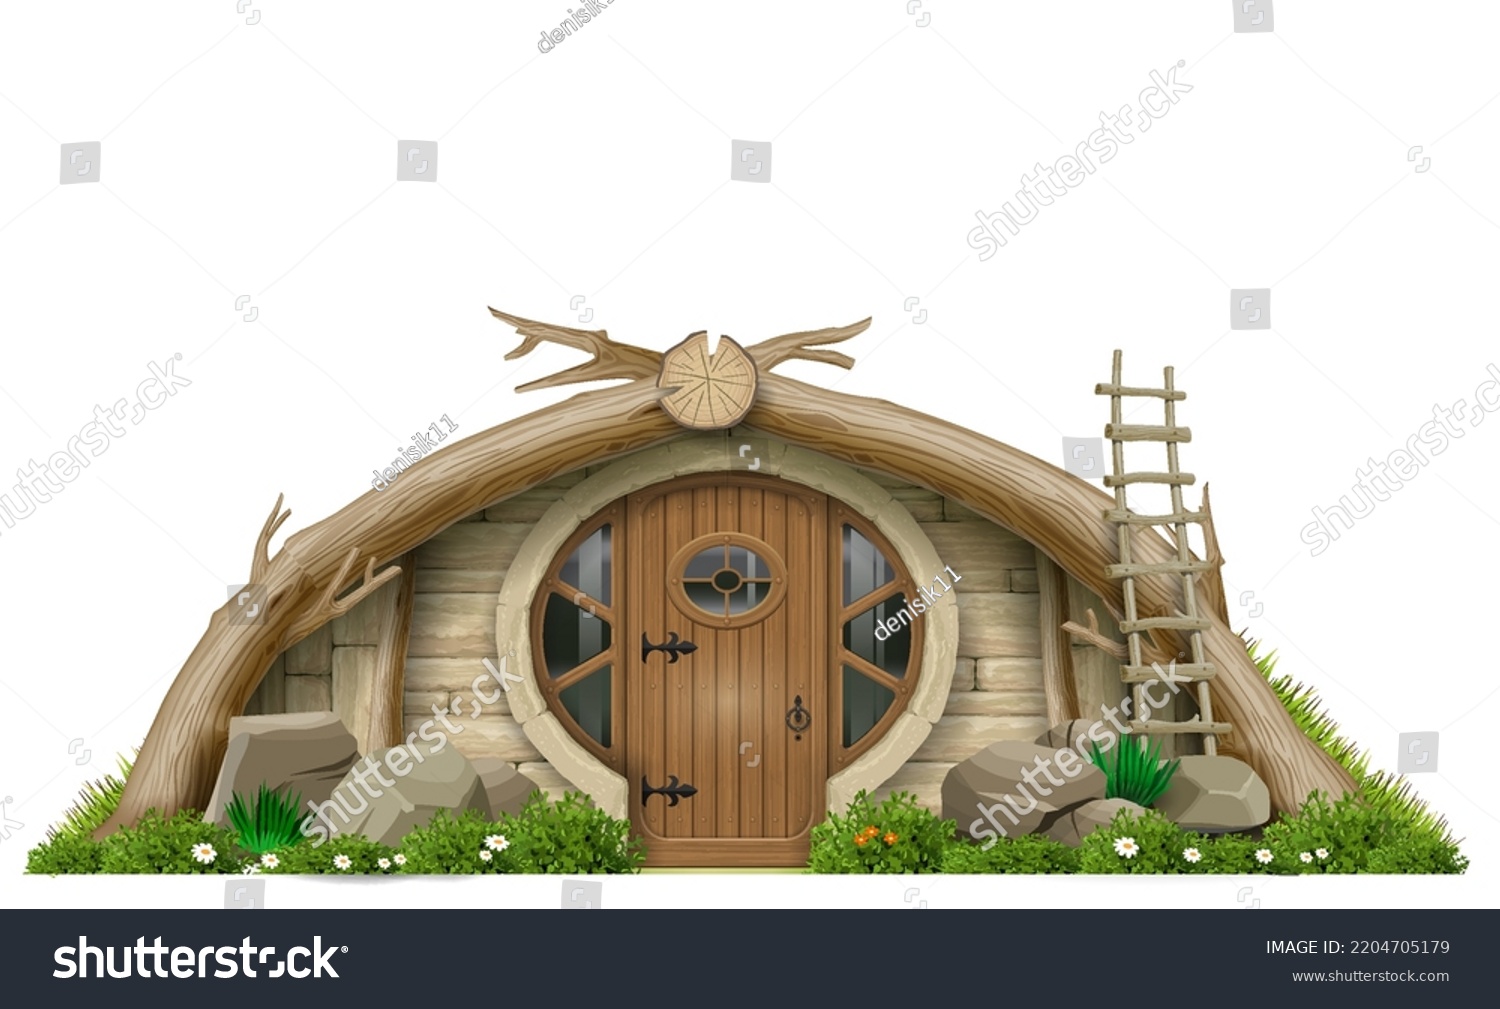 SVG of Facade of a fabulous gnome or hobbit house. Chum wigwam or dwelling of primitive man. svg